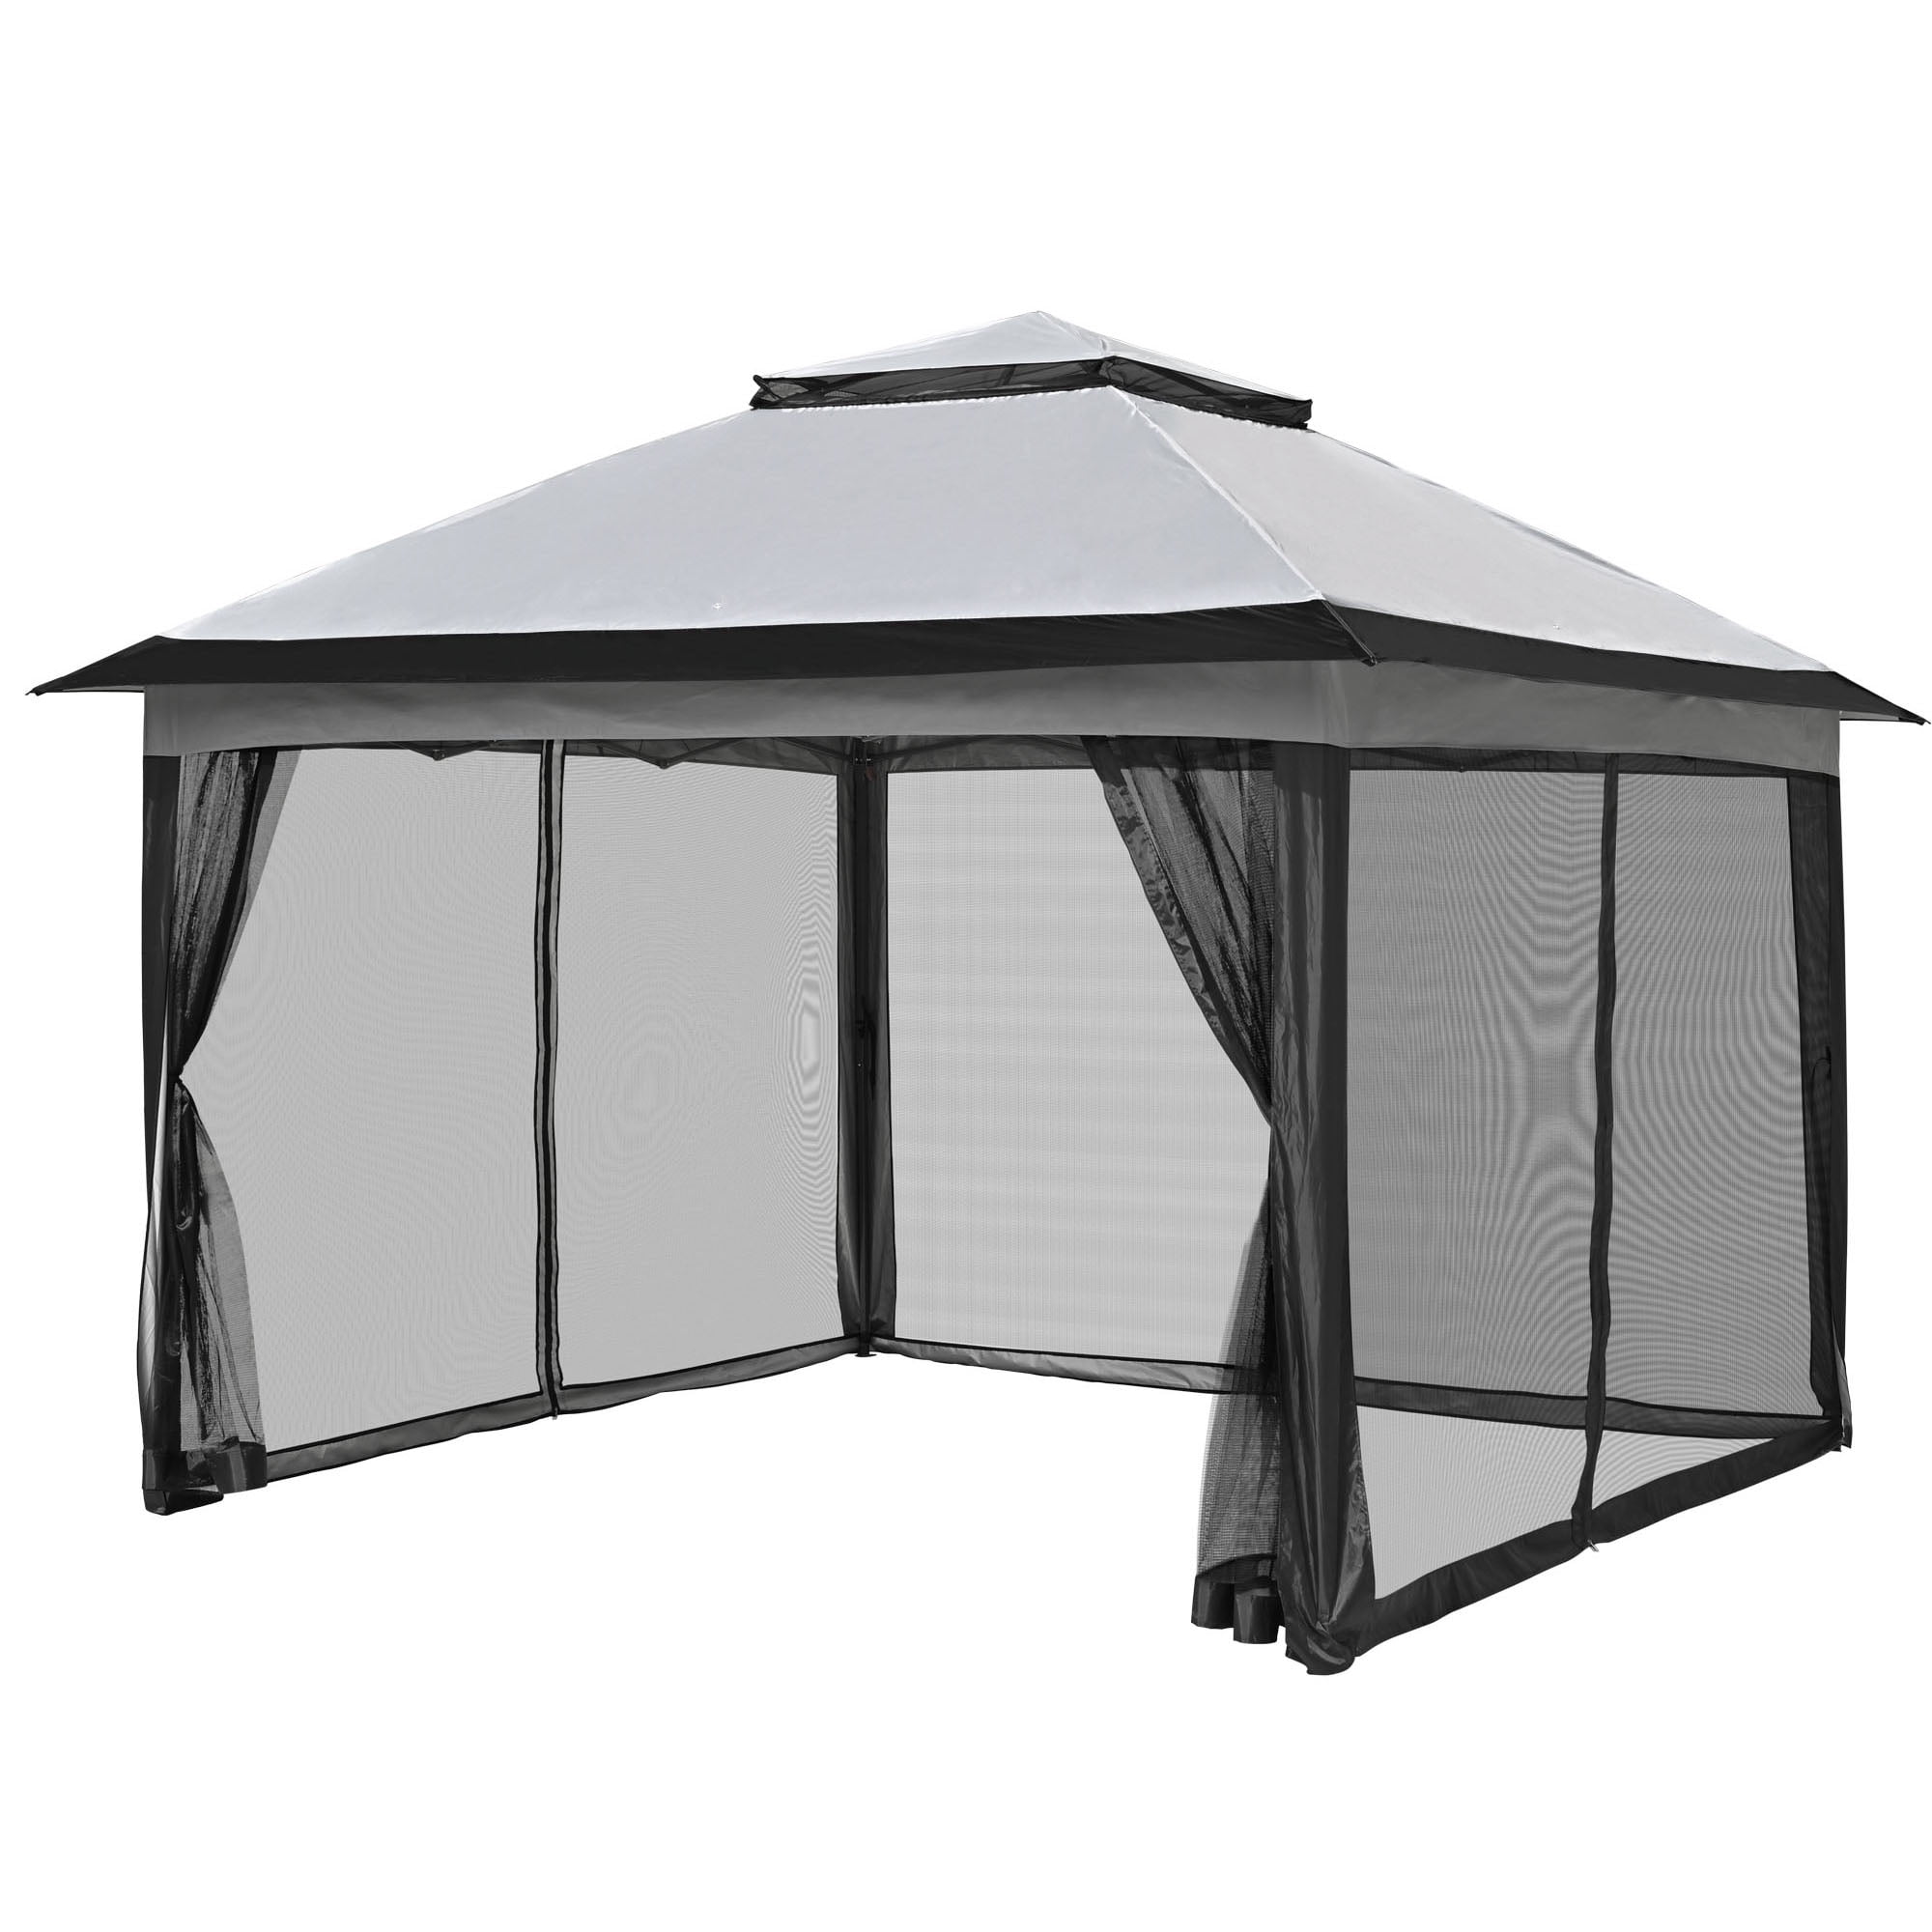 Yescom All-in-1 11x11 Ft Pop-Up Gazebo Tent with Mesh Sidewall Canopy Carry  Bag for Outdoor Patio Picnic Light Grey